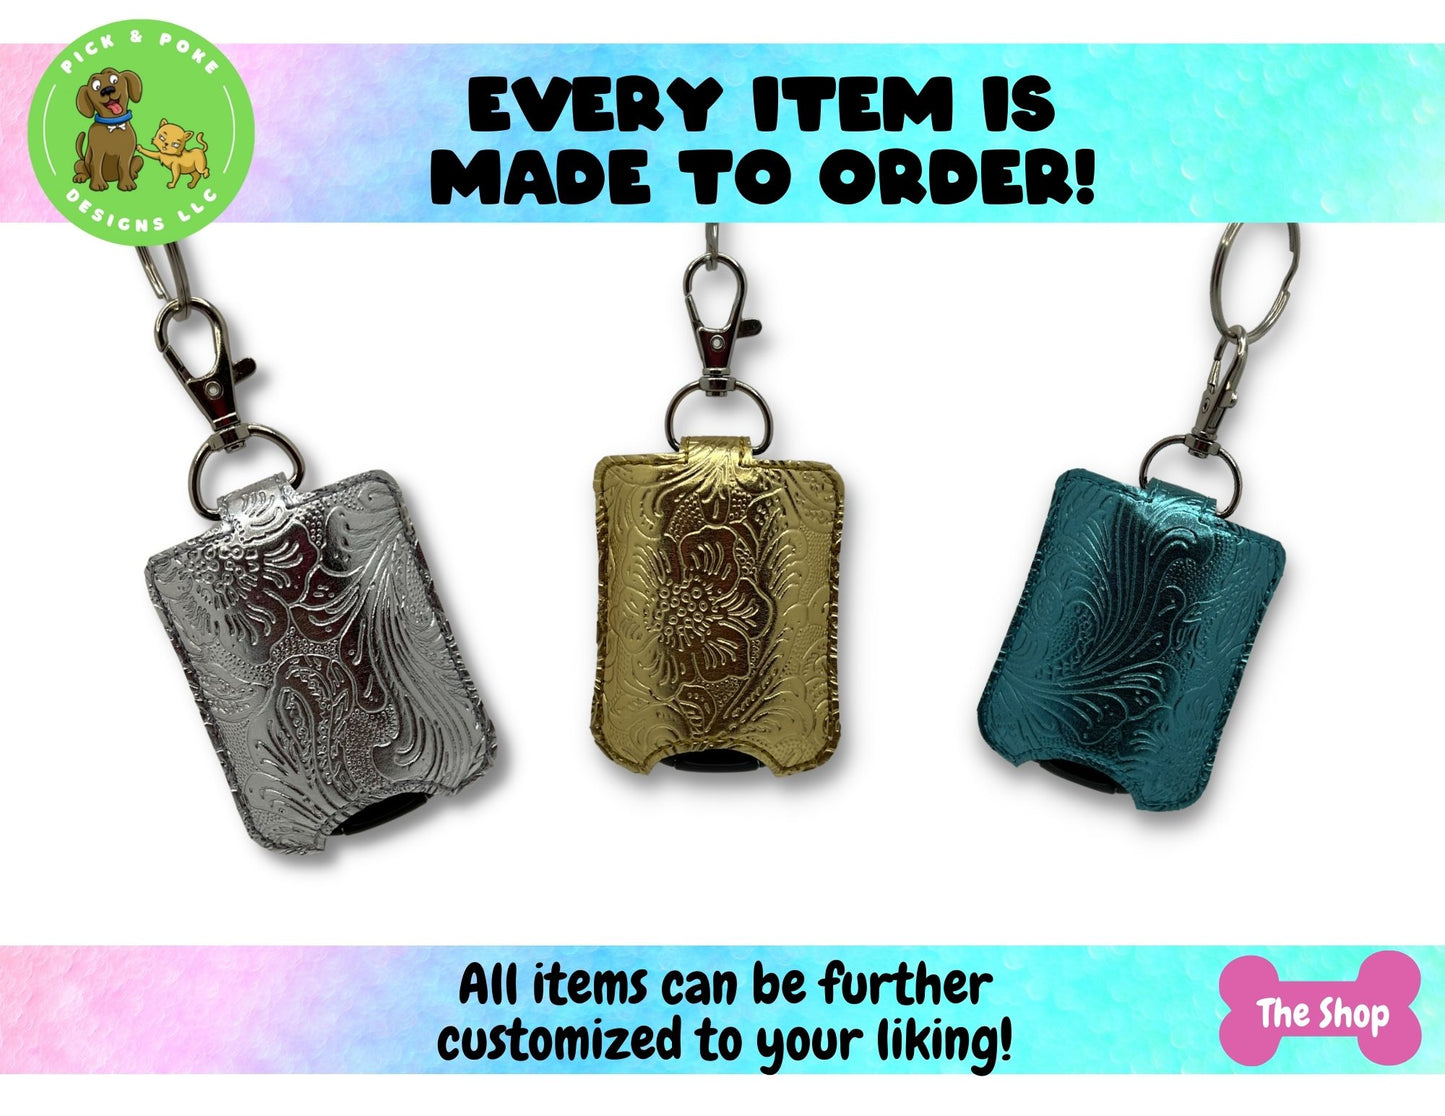 Metallic Faux Tooled Leather Hand Sanitizer Holder Key Chain | Embroidered on Vinyl | Made to Order